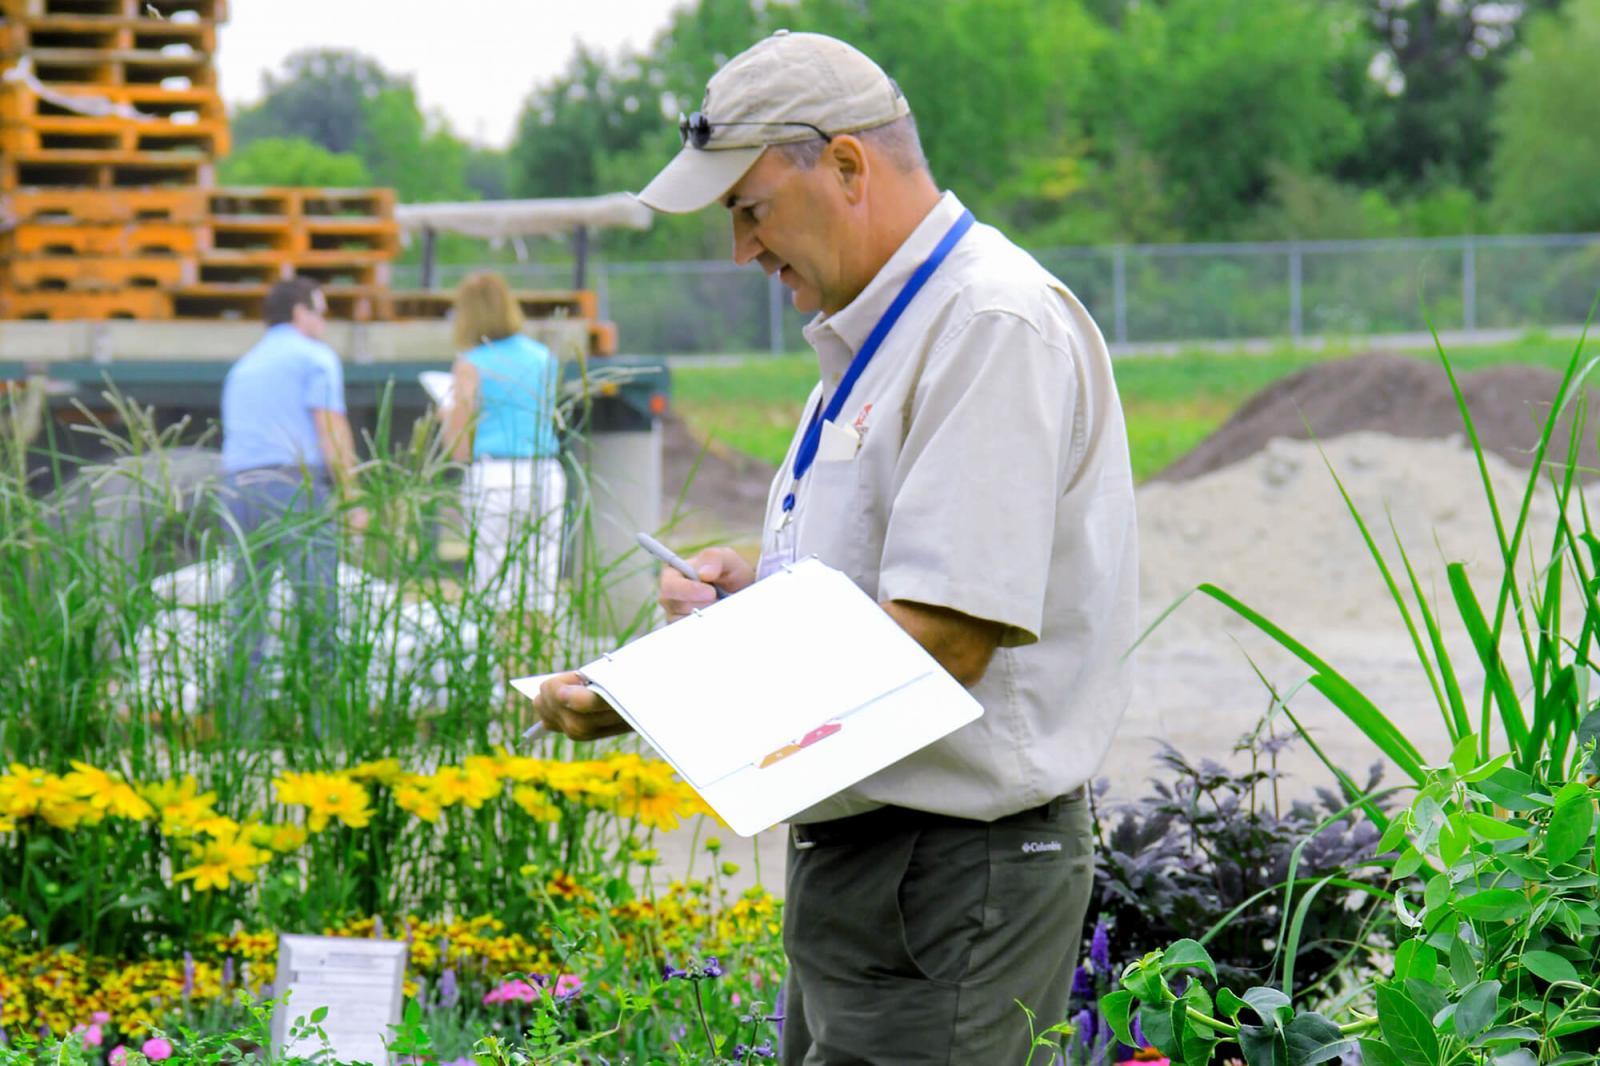 Michael Pascoe of Fanshawe College was kept busy judging plant material at this year’s auction.